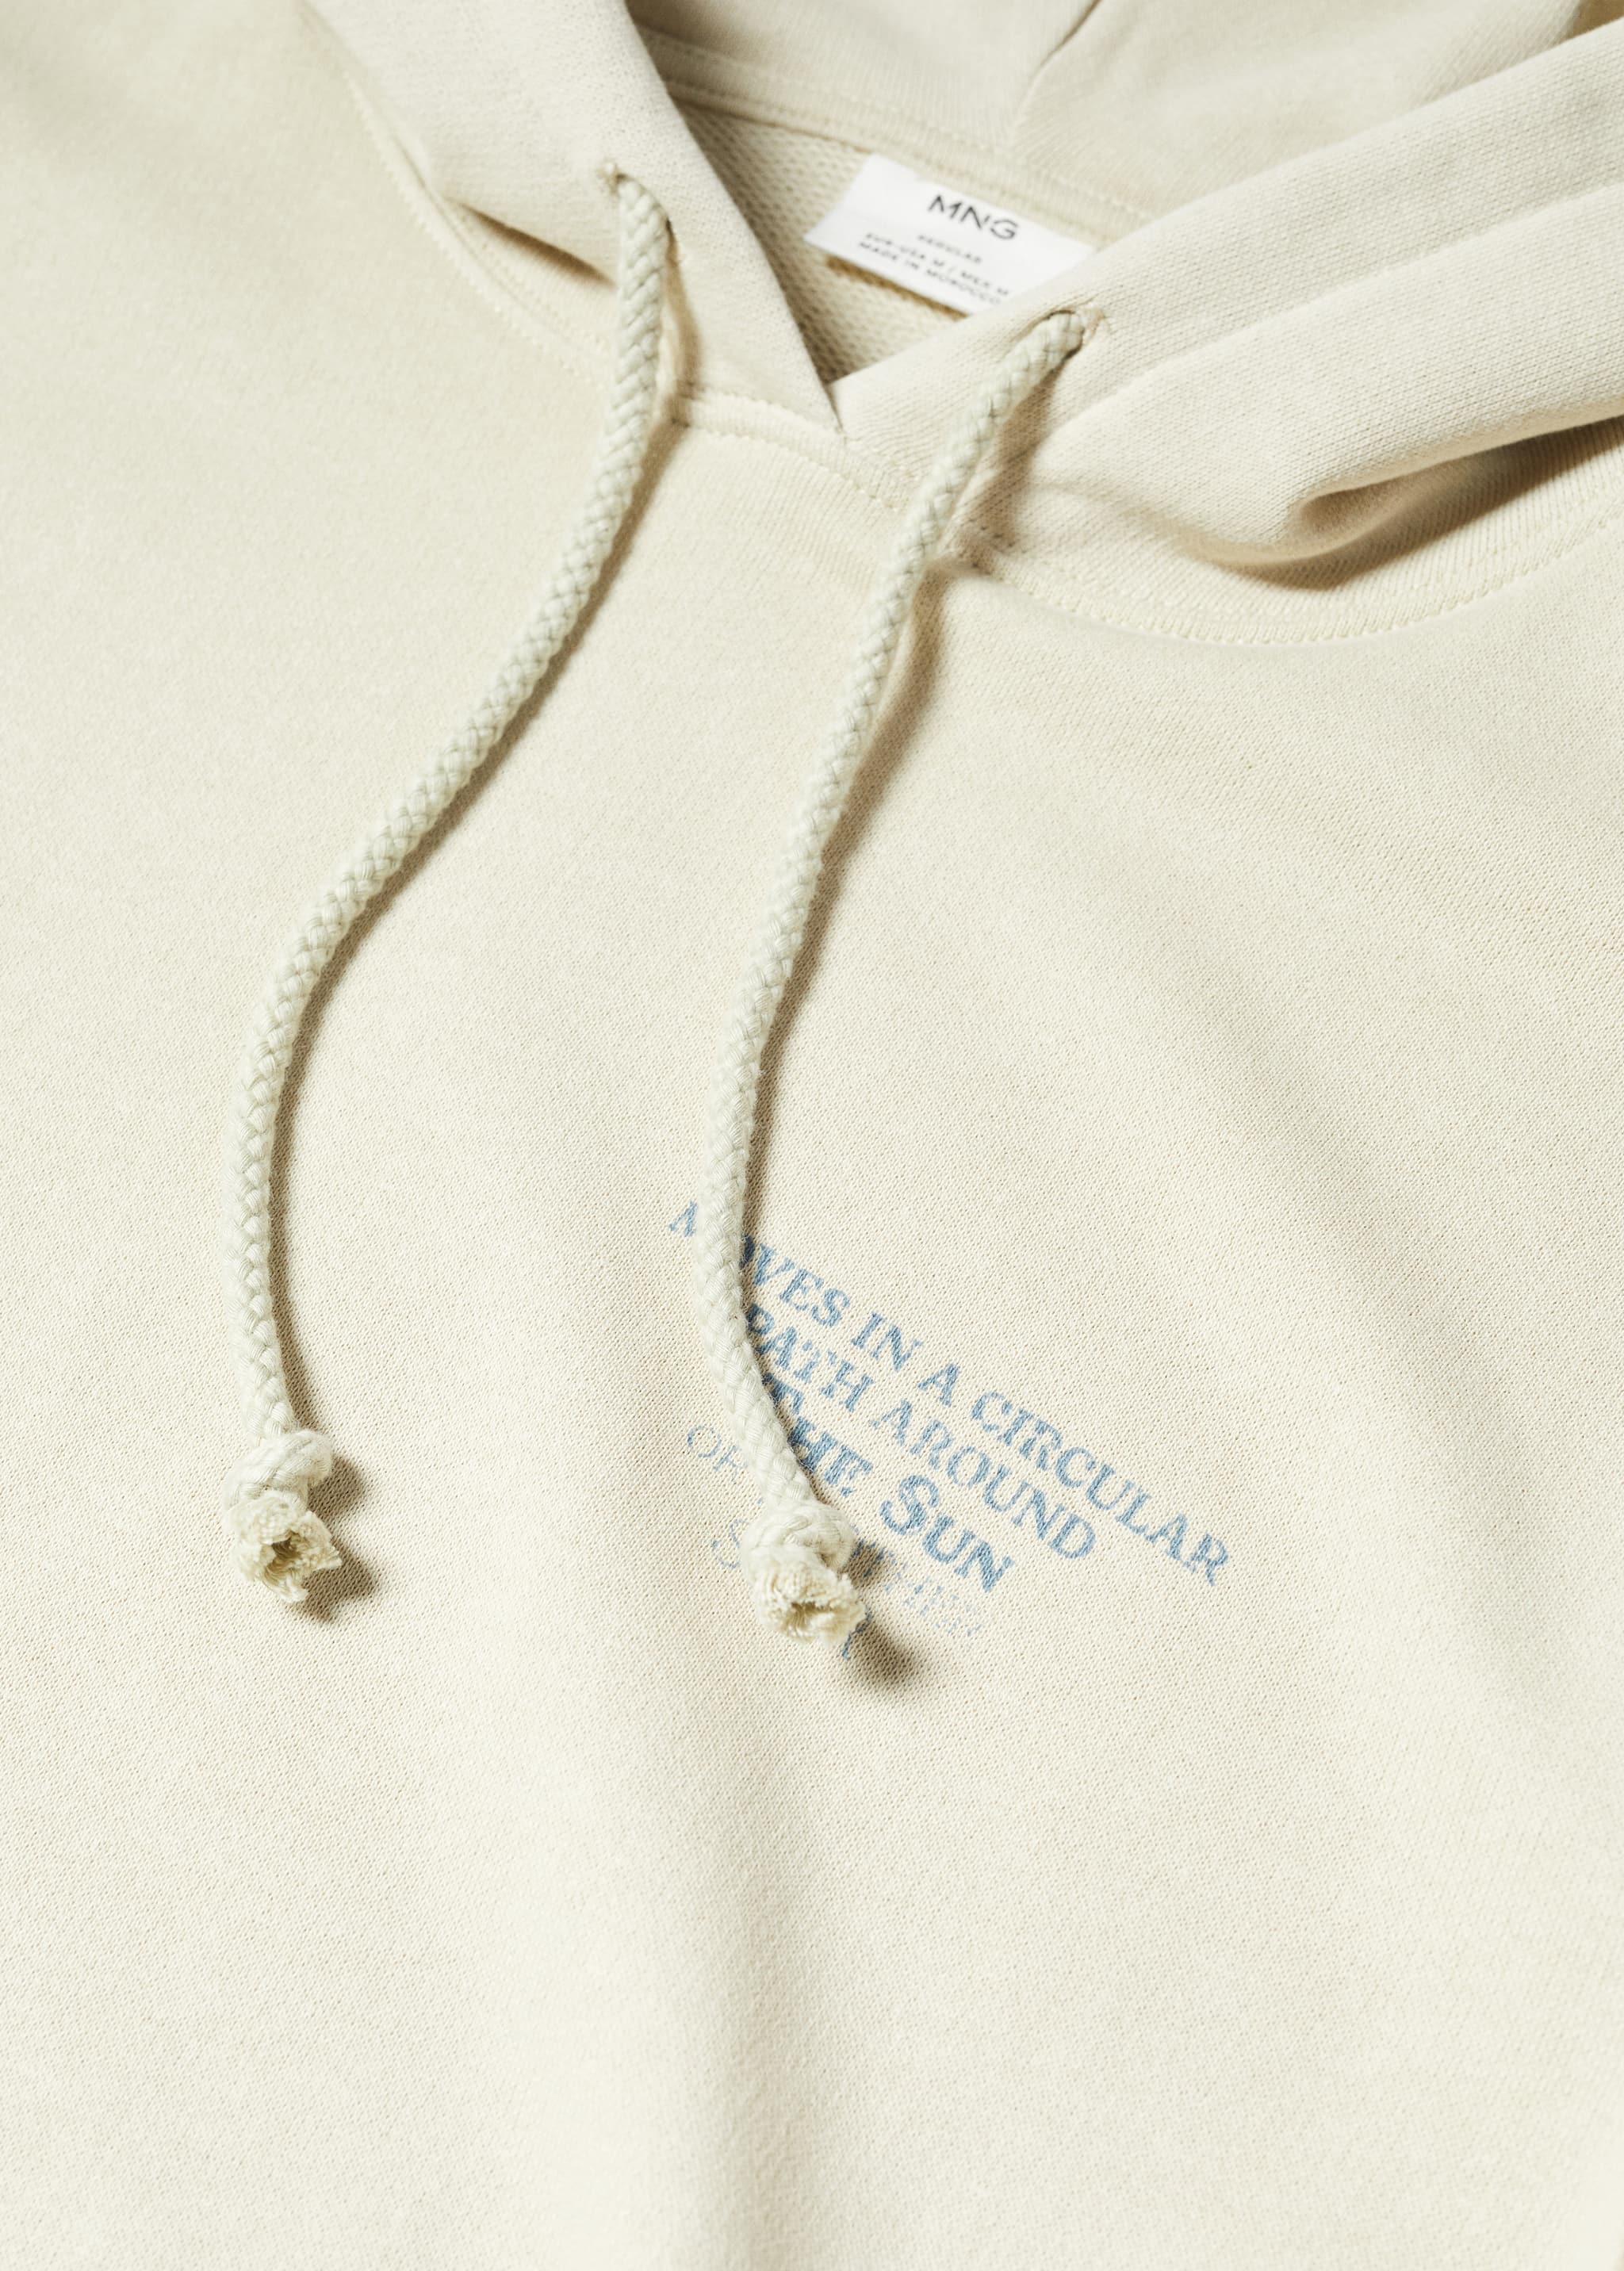 100% cotton hooded sweatshirt text - Details of the article 8